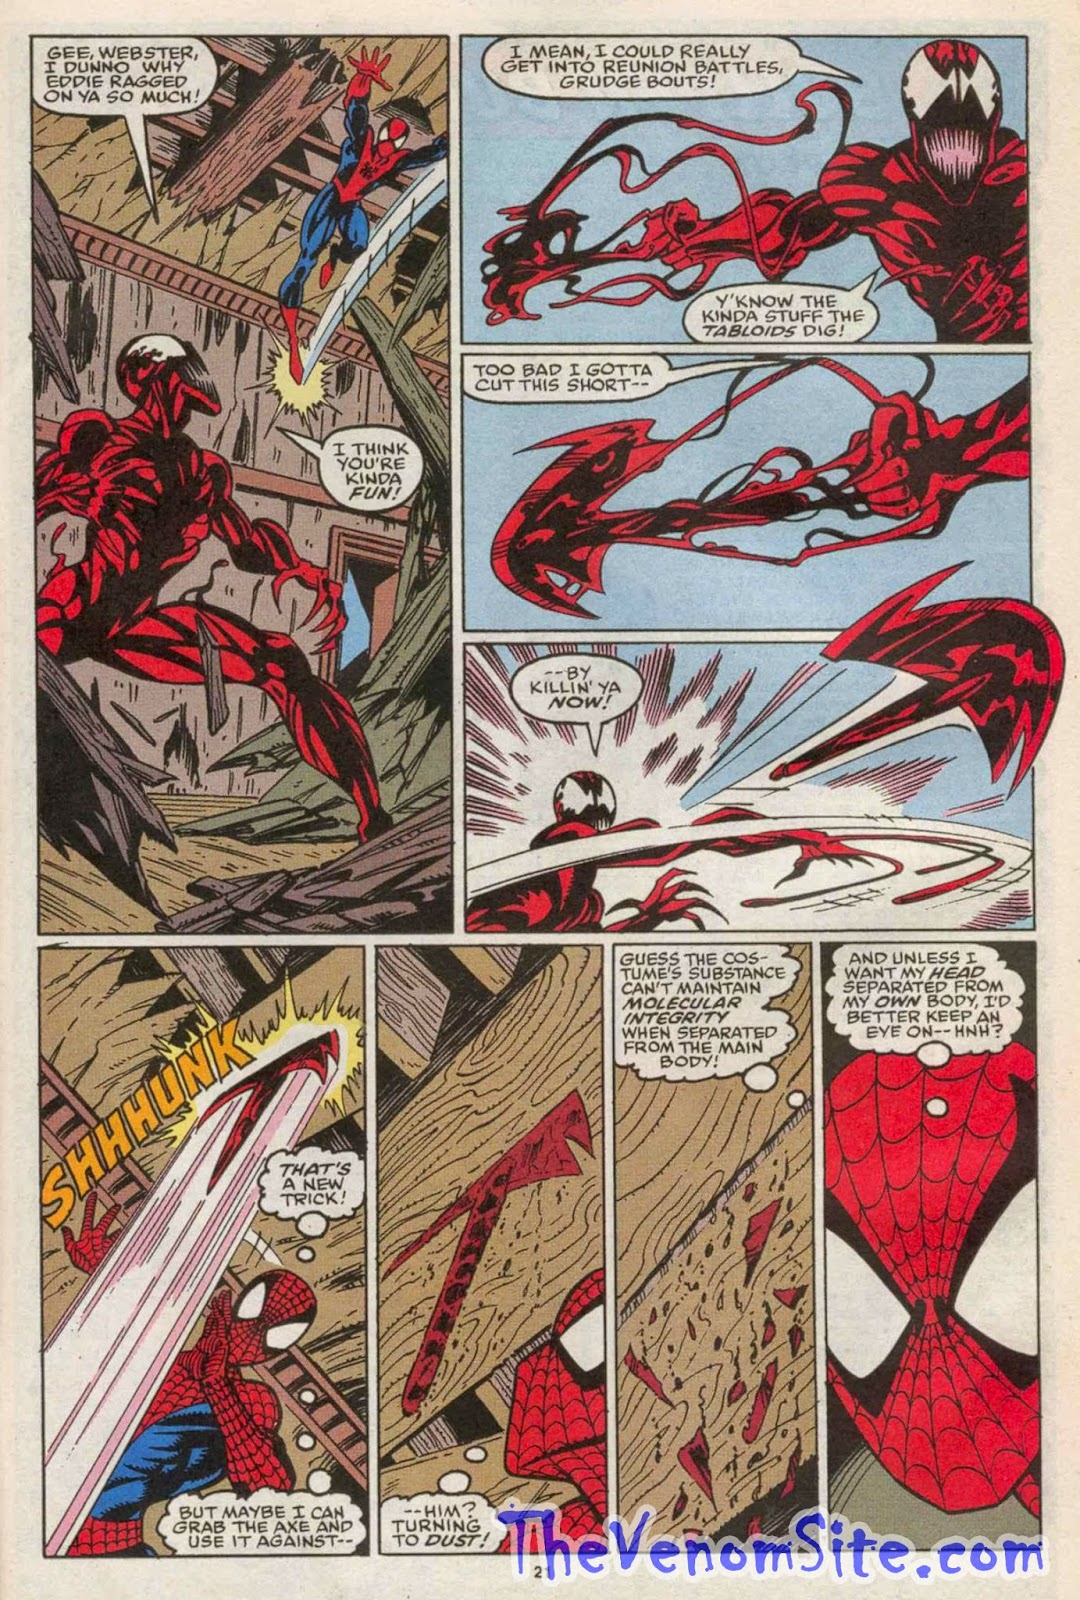 Revisit Carnage's origin in Spider-Man: Vengeance of Venom trade paperback available on Amazon